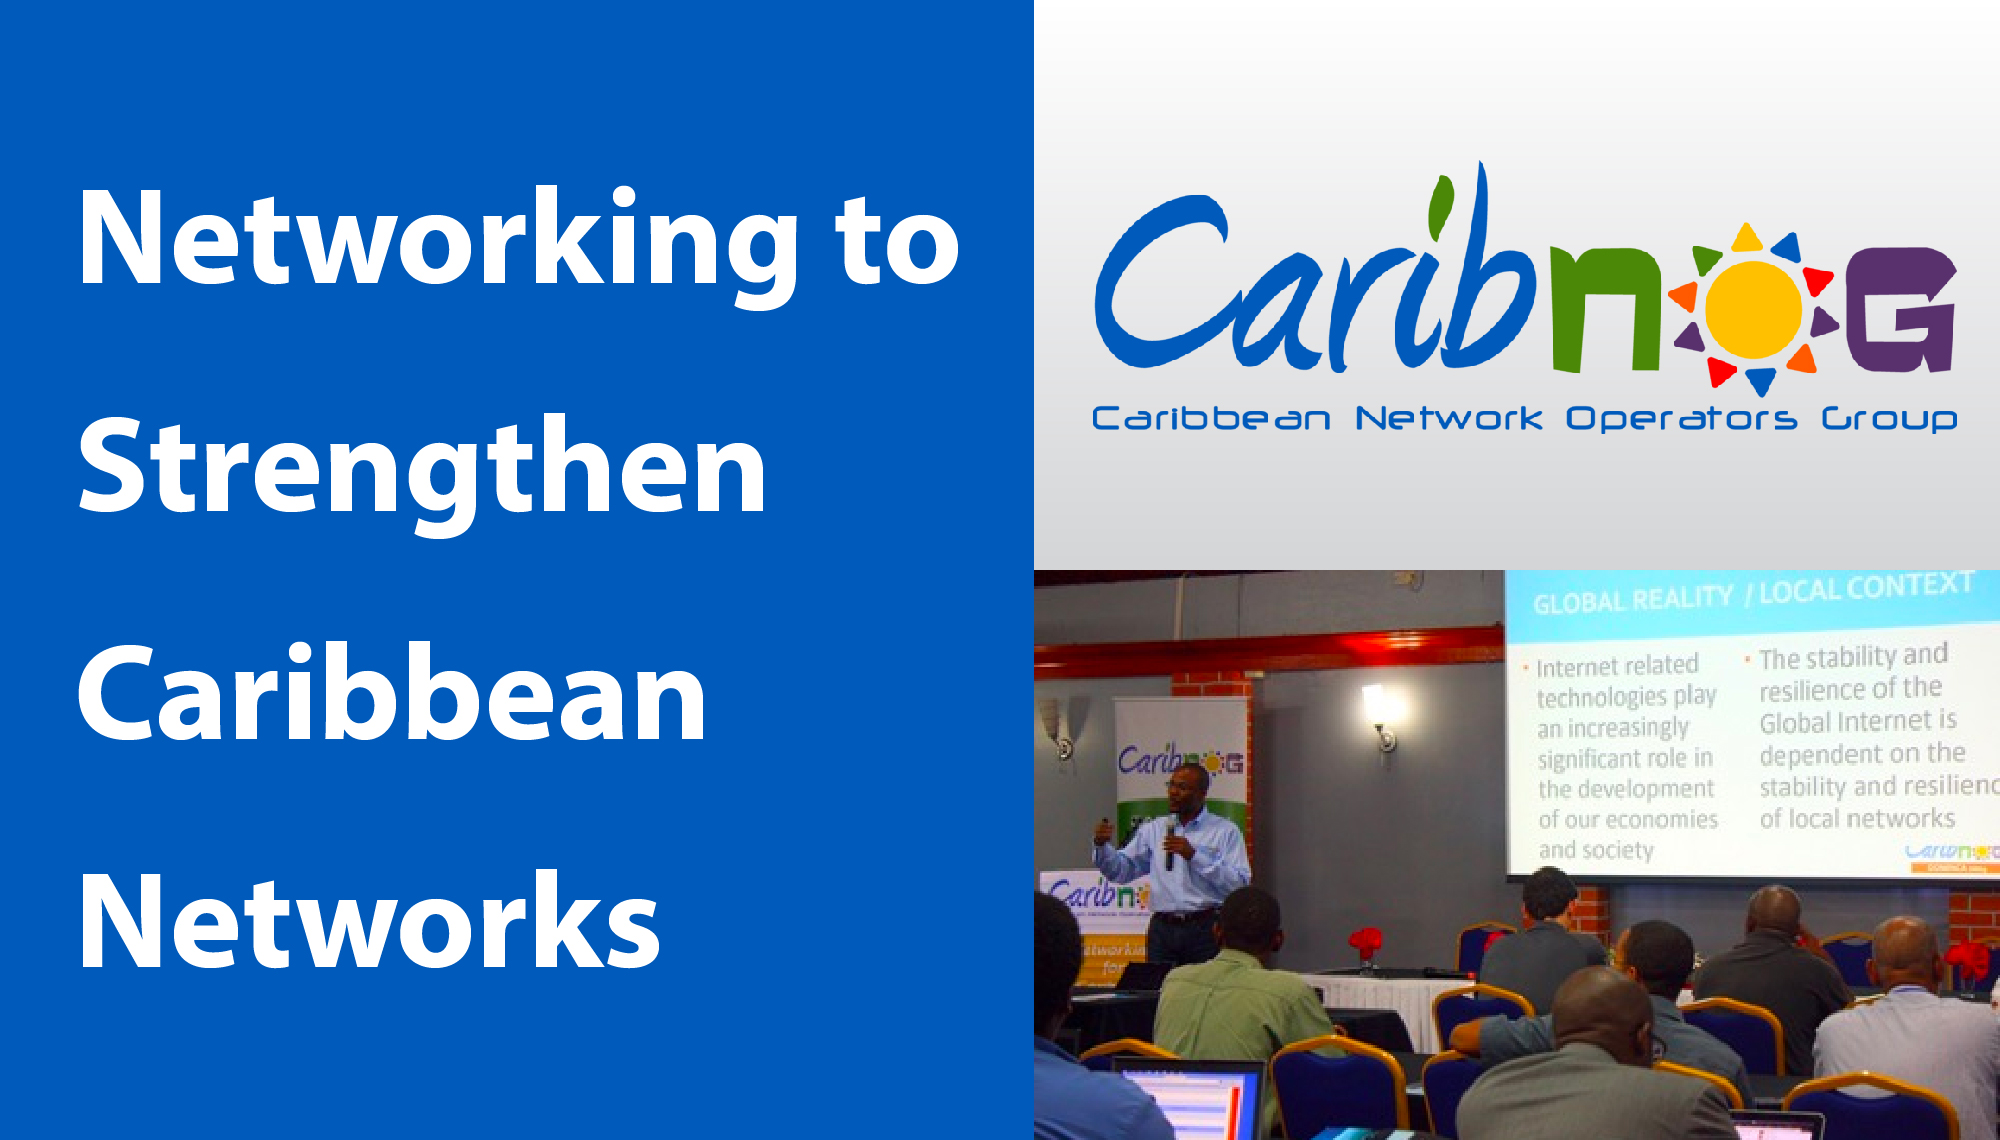 CaribNOG – Networking to Strengthen Caribbean Networks